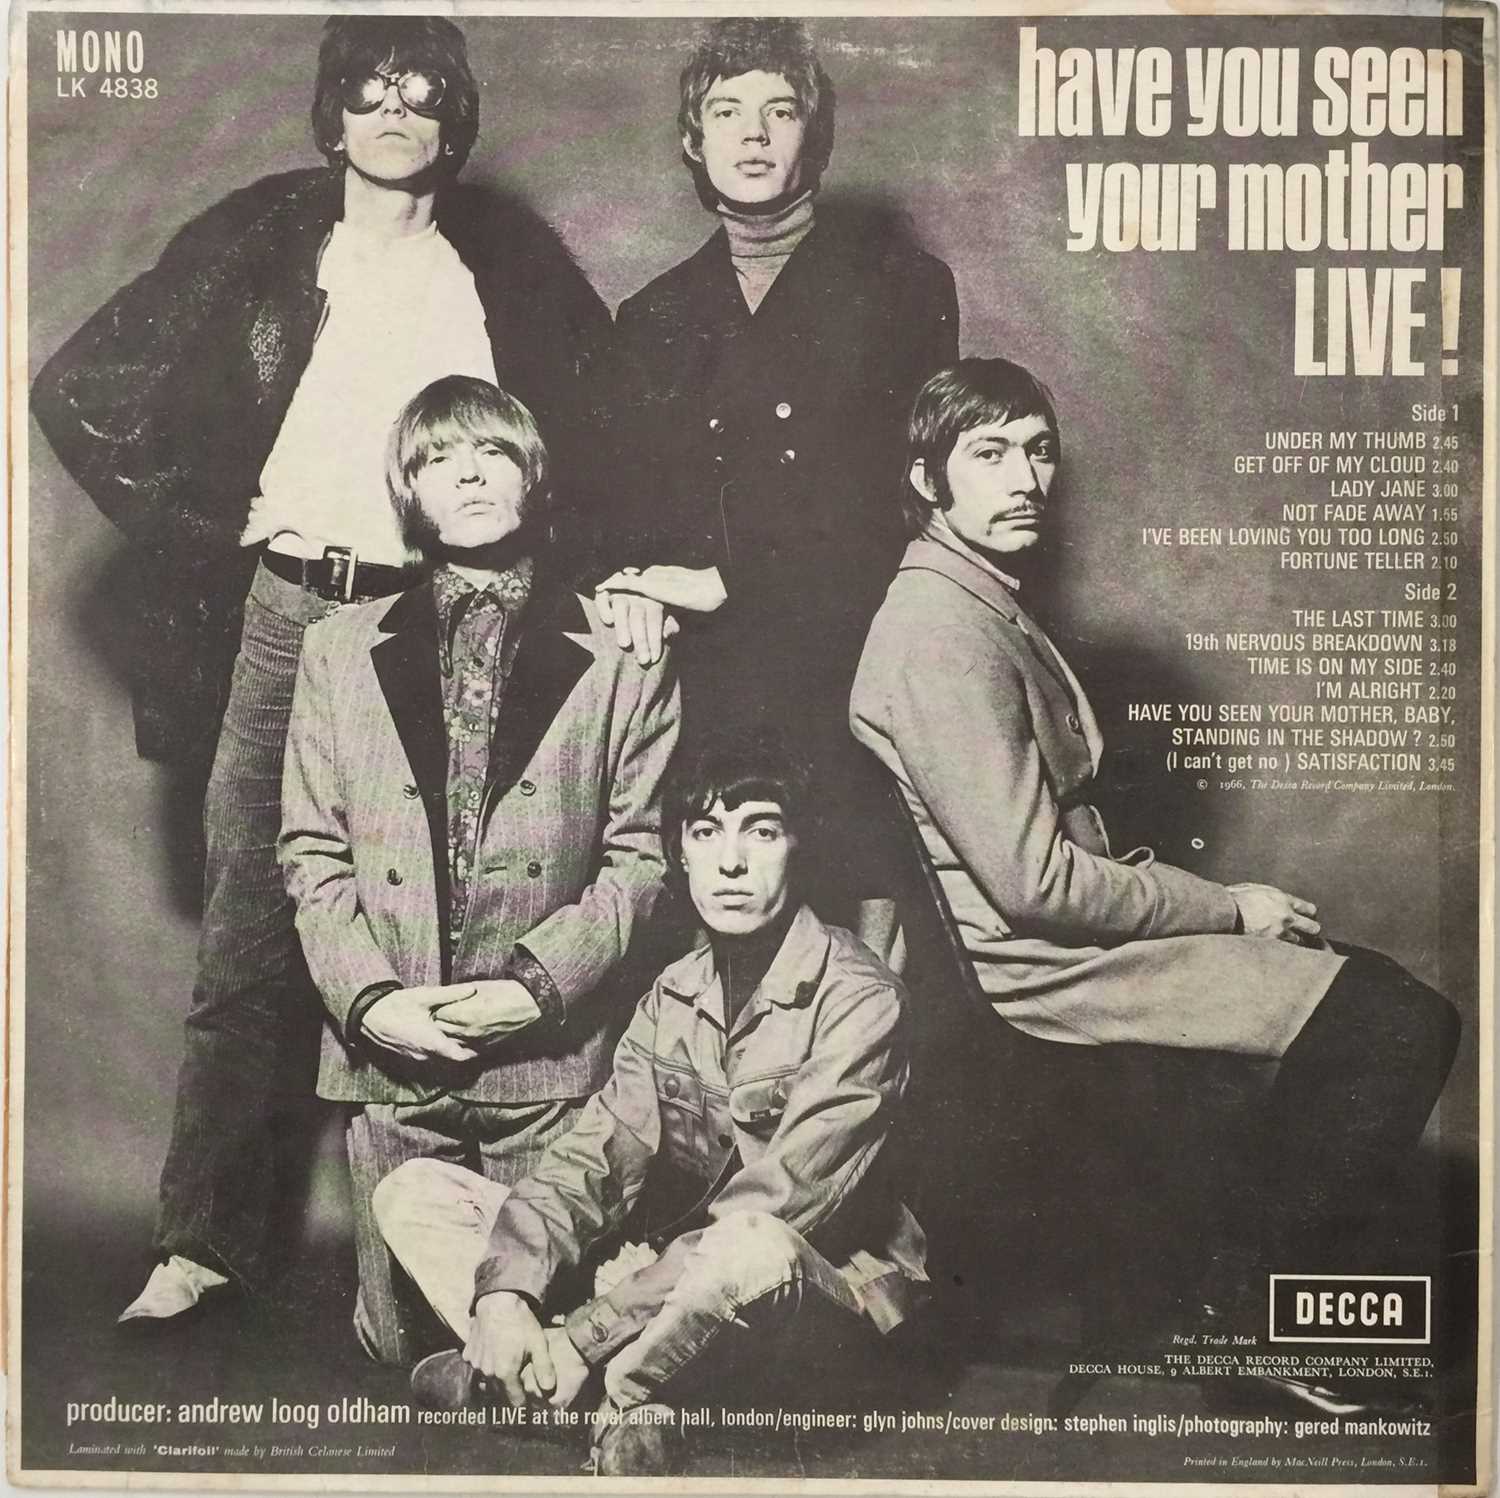 THE ROLLING STONES - HAVE YOU SEEN YOUR MOTHER - LIVE! LP (MONO LK 4838) - Image 3 of 5